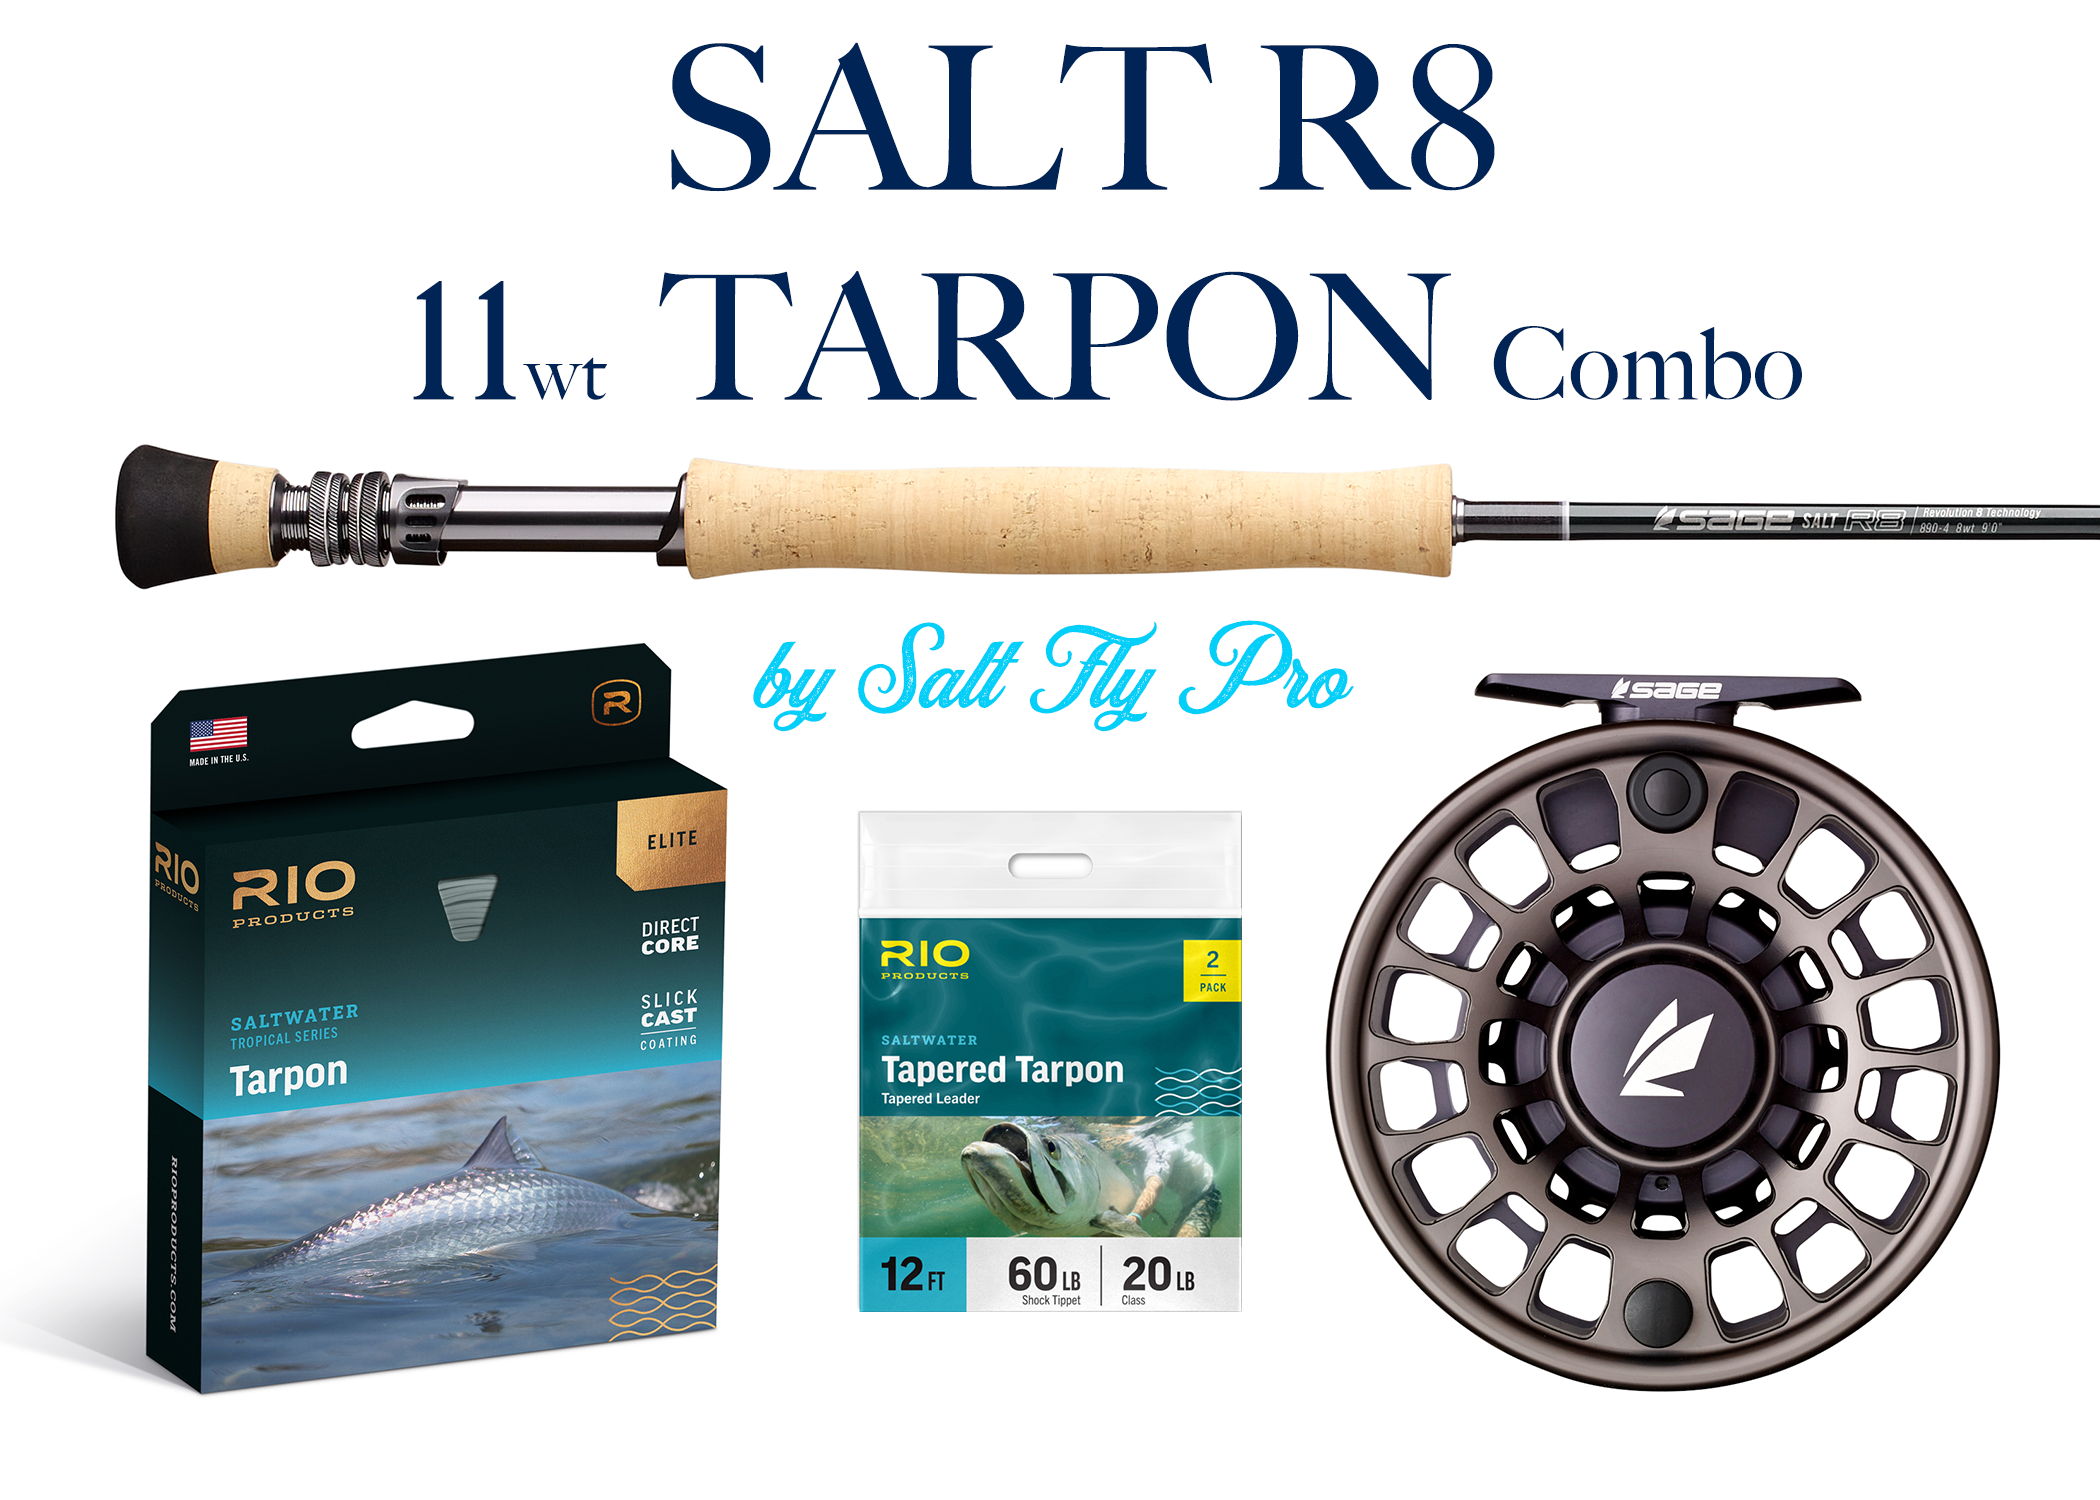 Sage SALT R8 11wt TARPON Saltwater Fly Rod Combo Outfit - NEW!